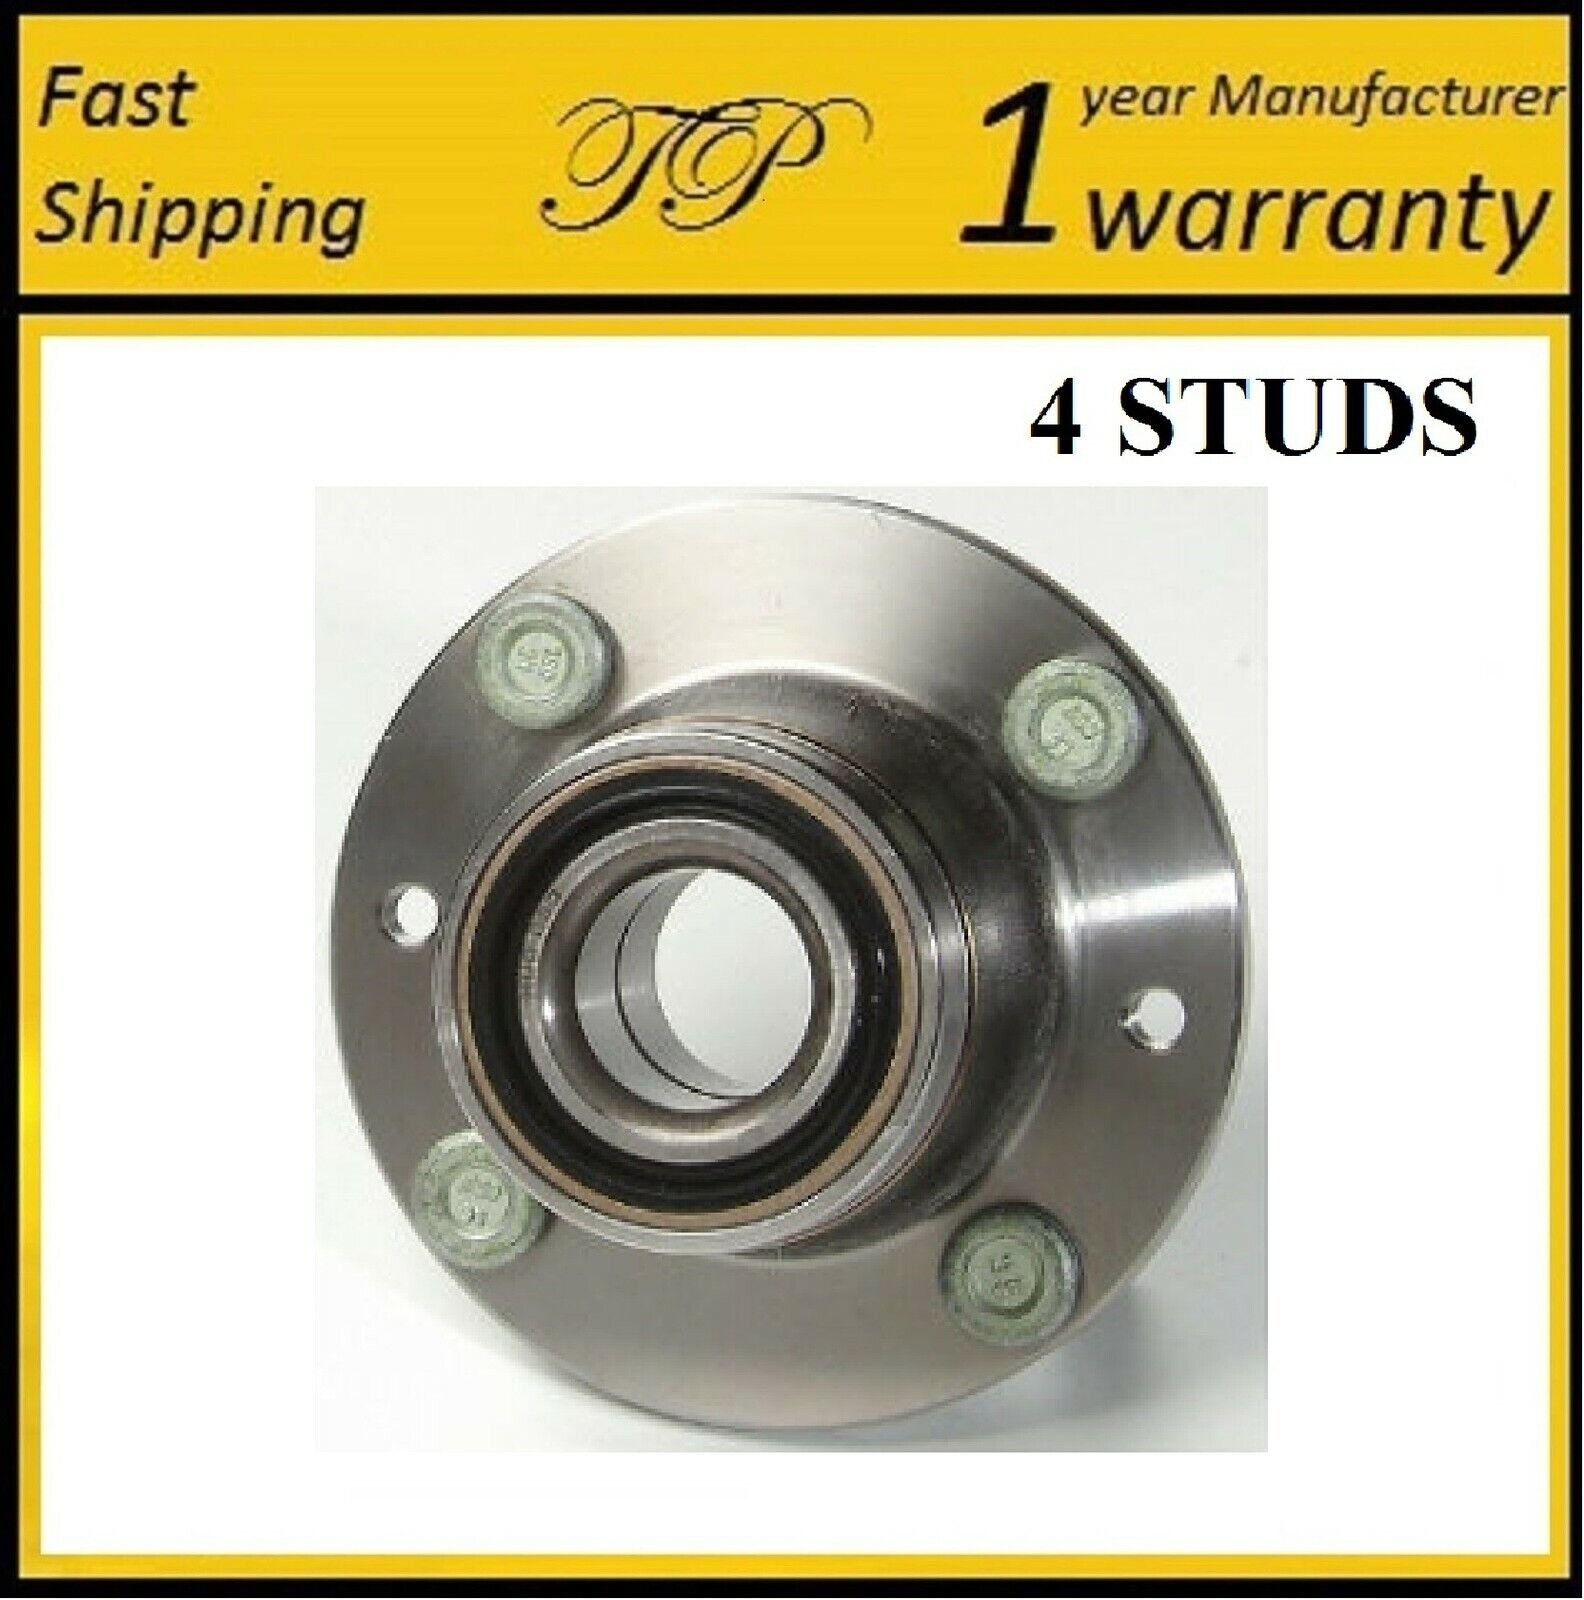 REAR Wheel Hub Bearing Assembly For 1994-1999 MERCURY TRACER NON-ABS, REAR DRUM